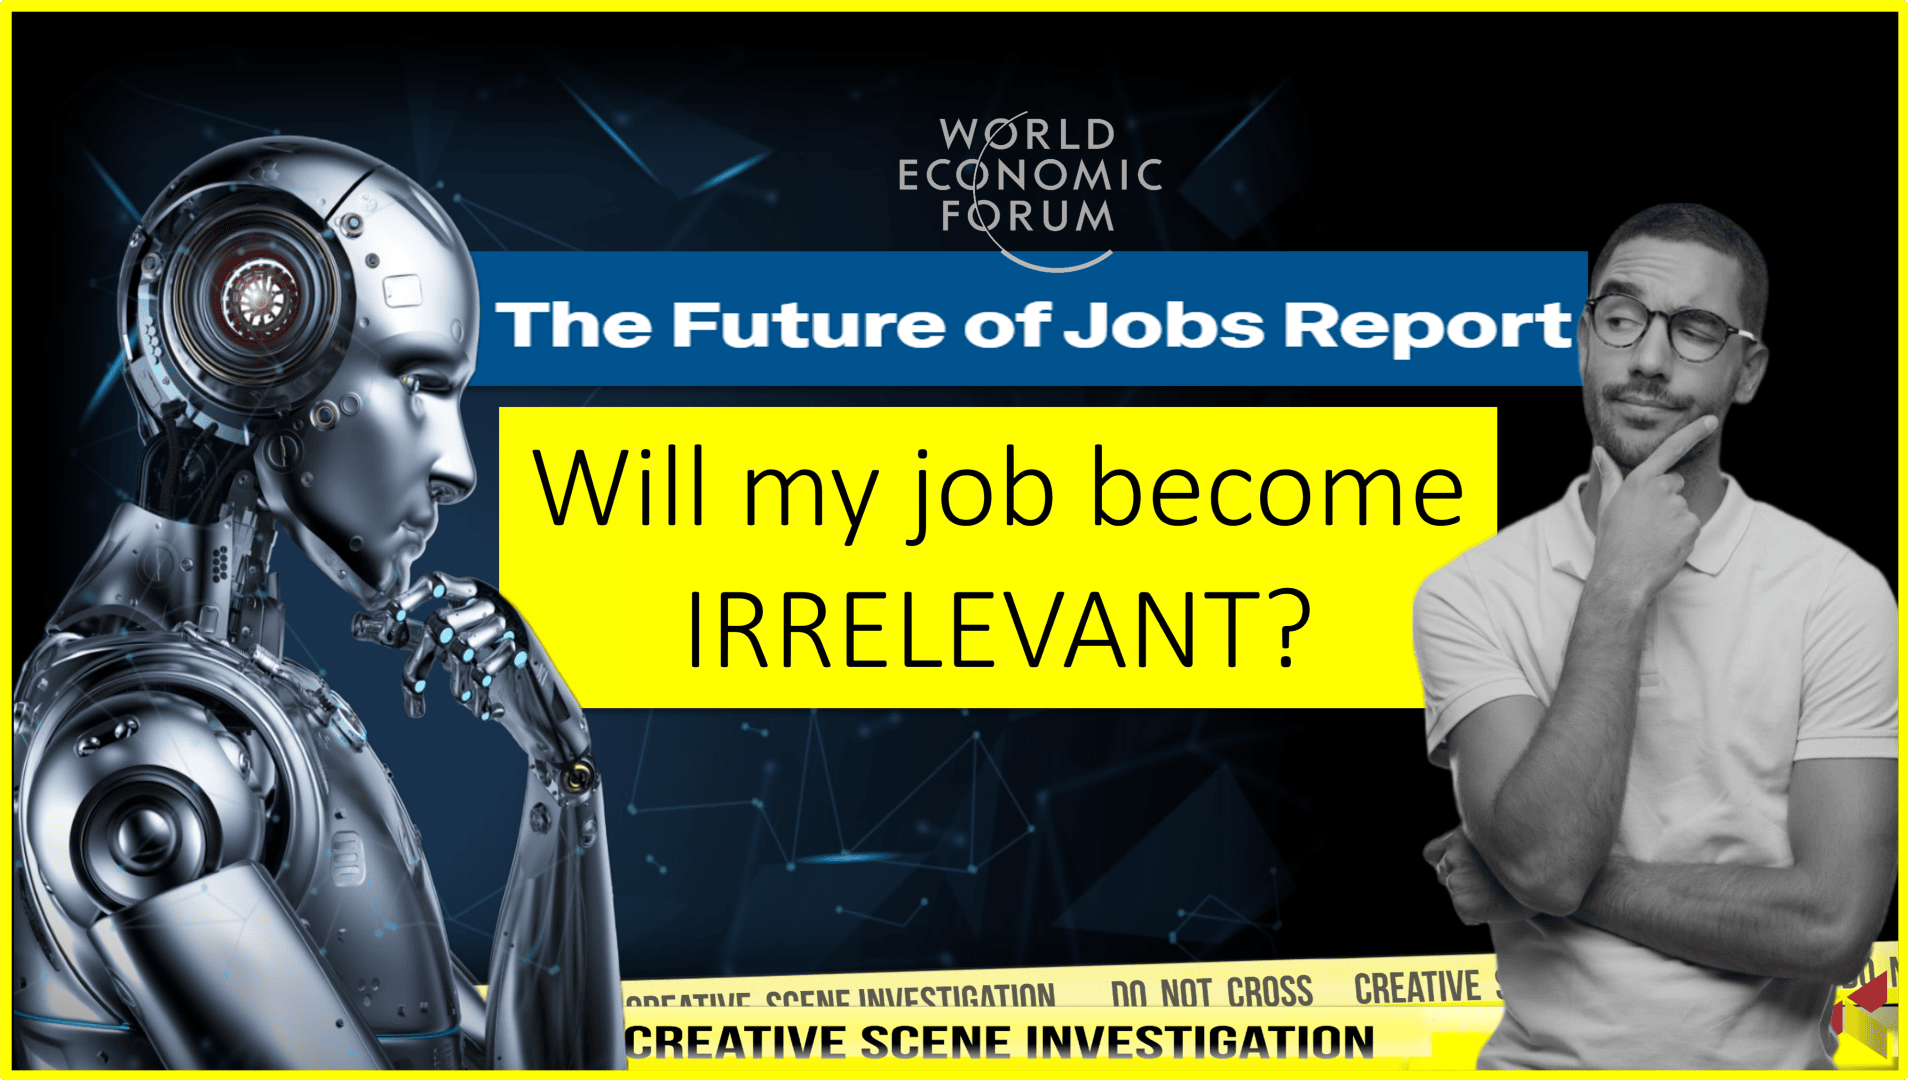 The Future of Jobs Report and Creative Thinking